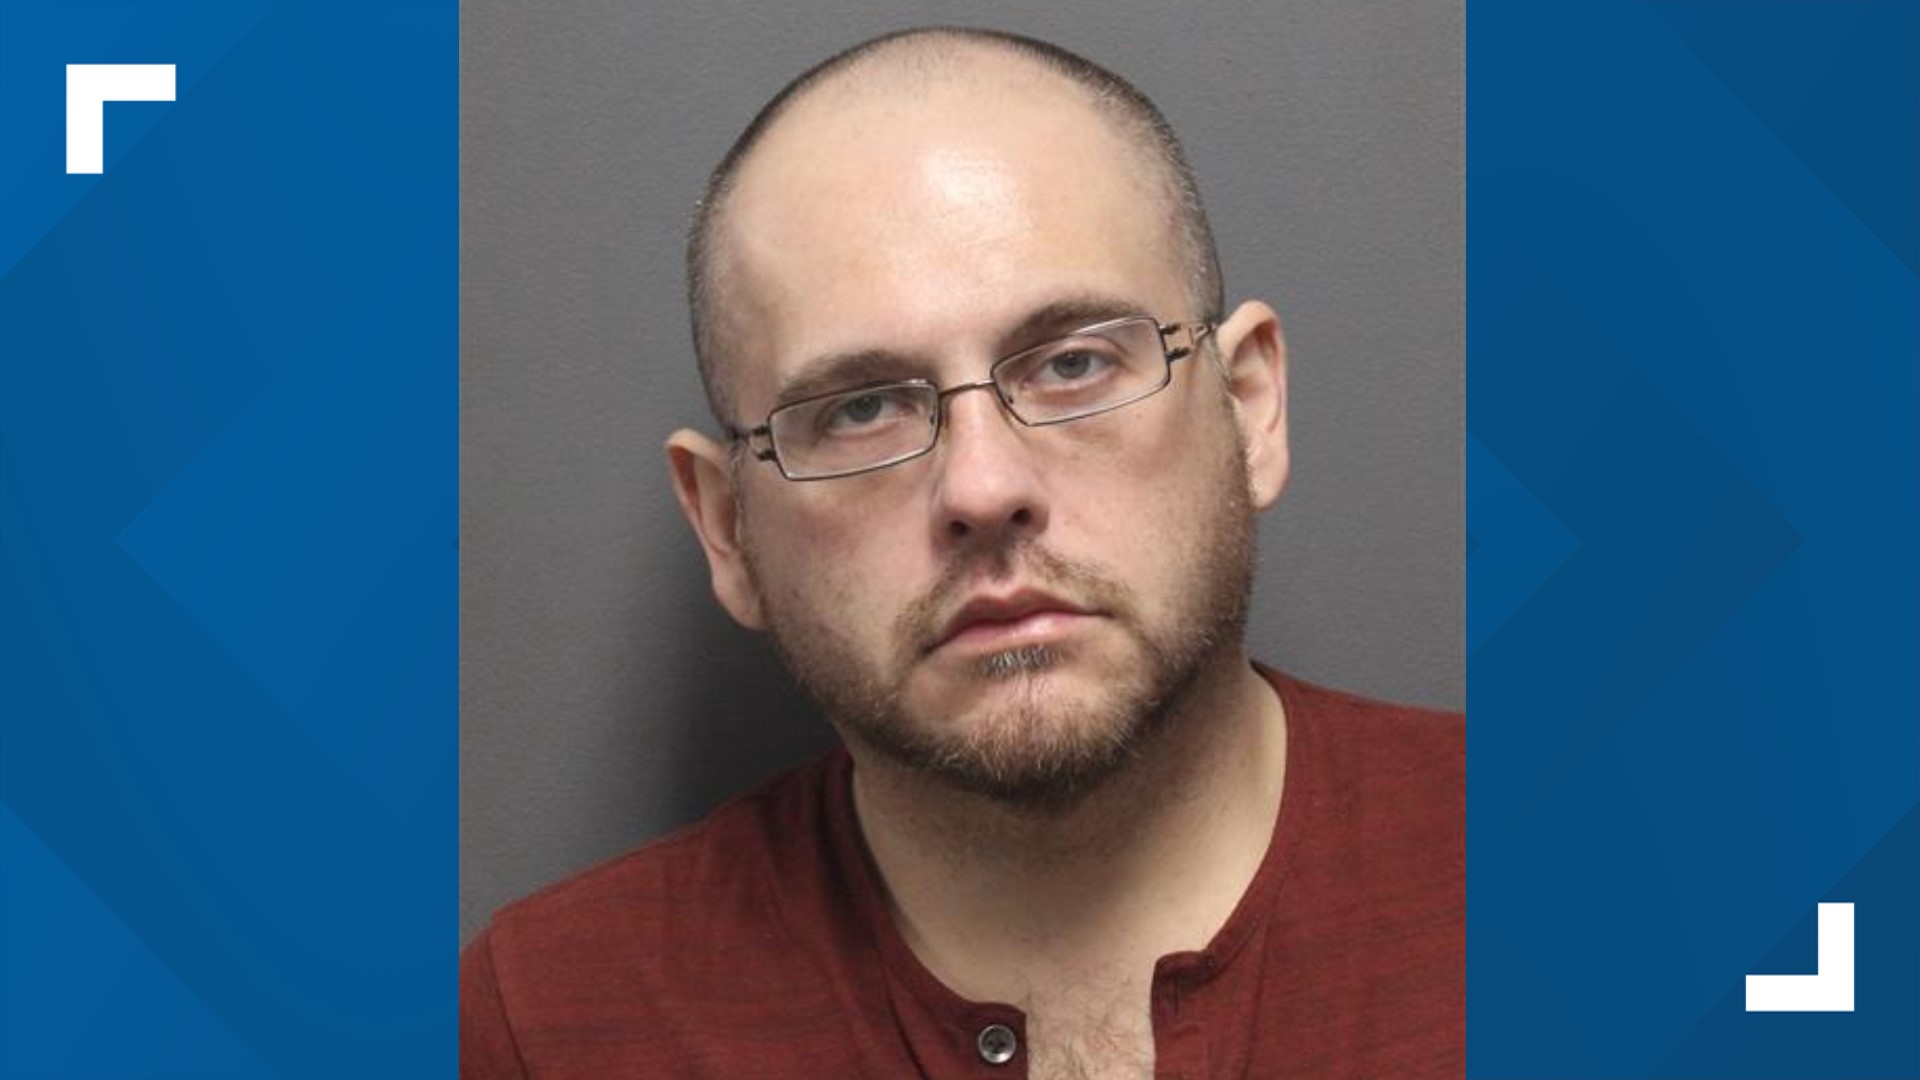 David Fortin was arrested earlier this month on child porn charges.